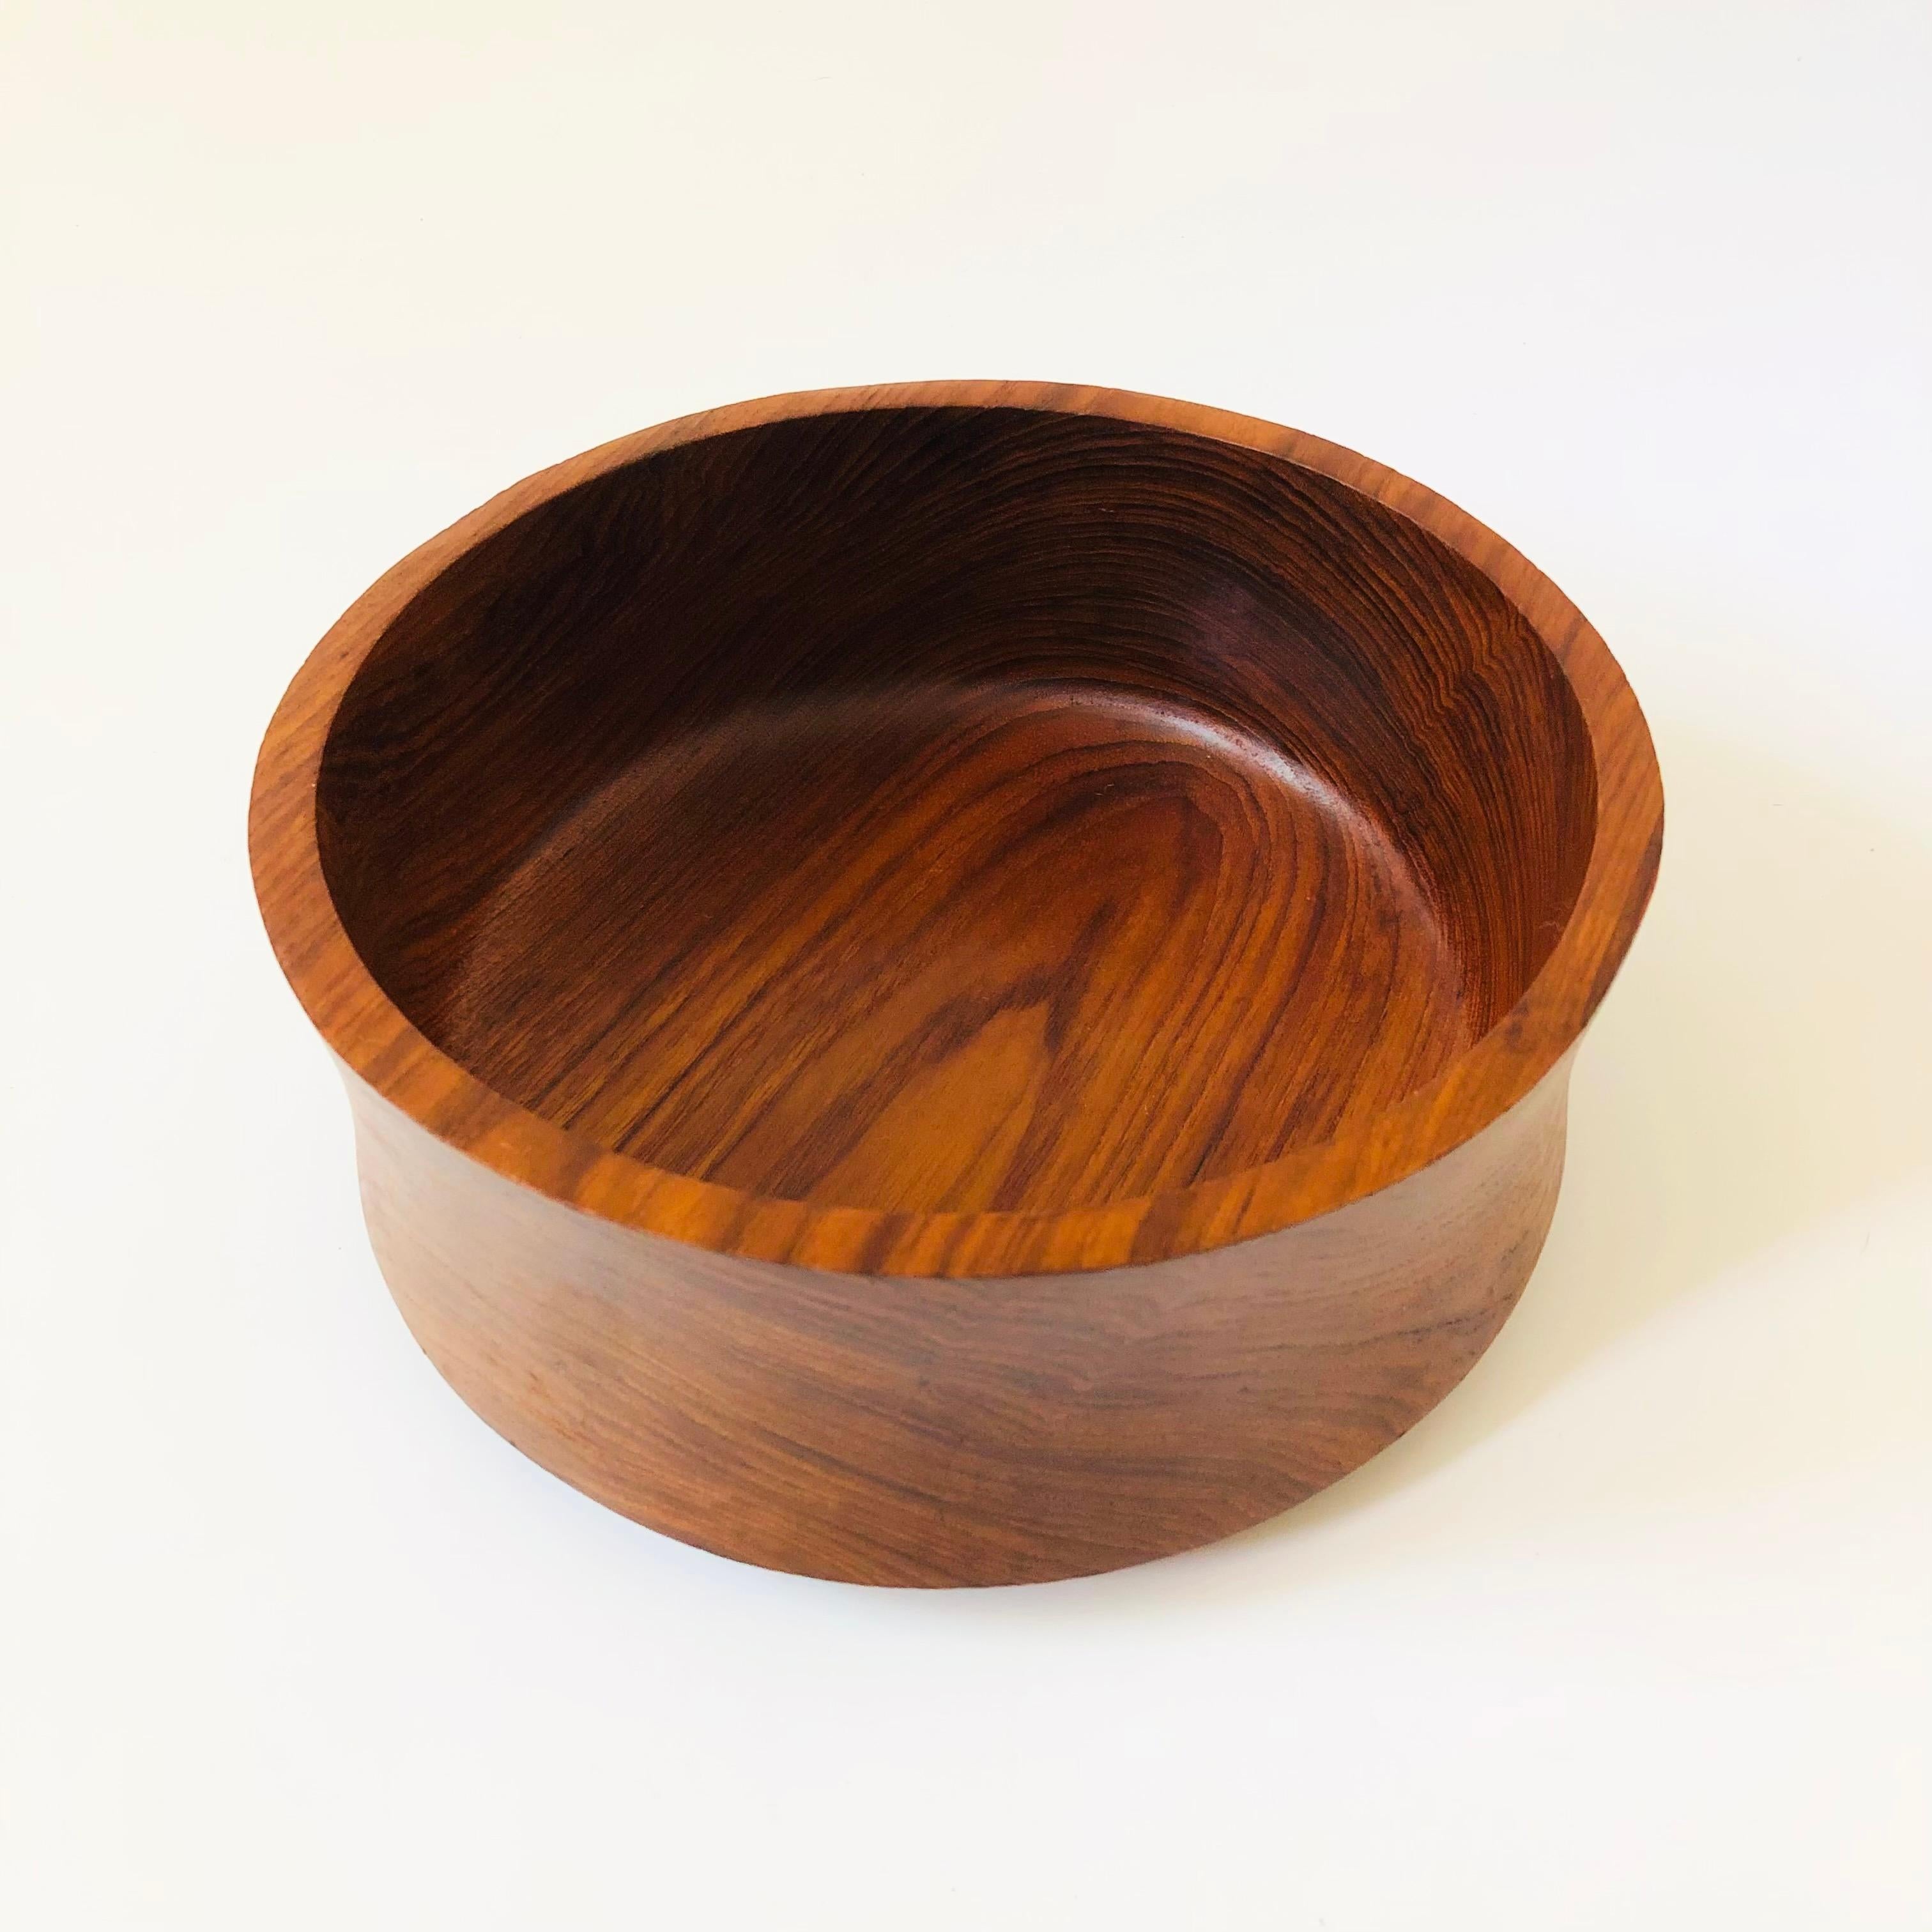 A lovely vintage teak salad bowl. Beautiful natural grain to the wood in a simple slightly fluted shape. A wonderful and useful dining accessory for a mid century home.

